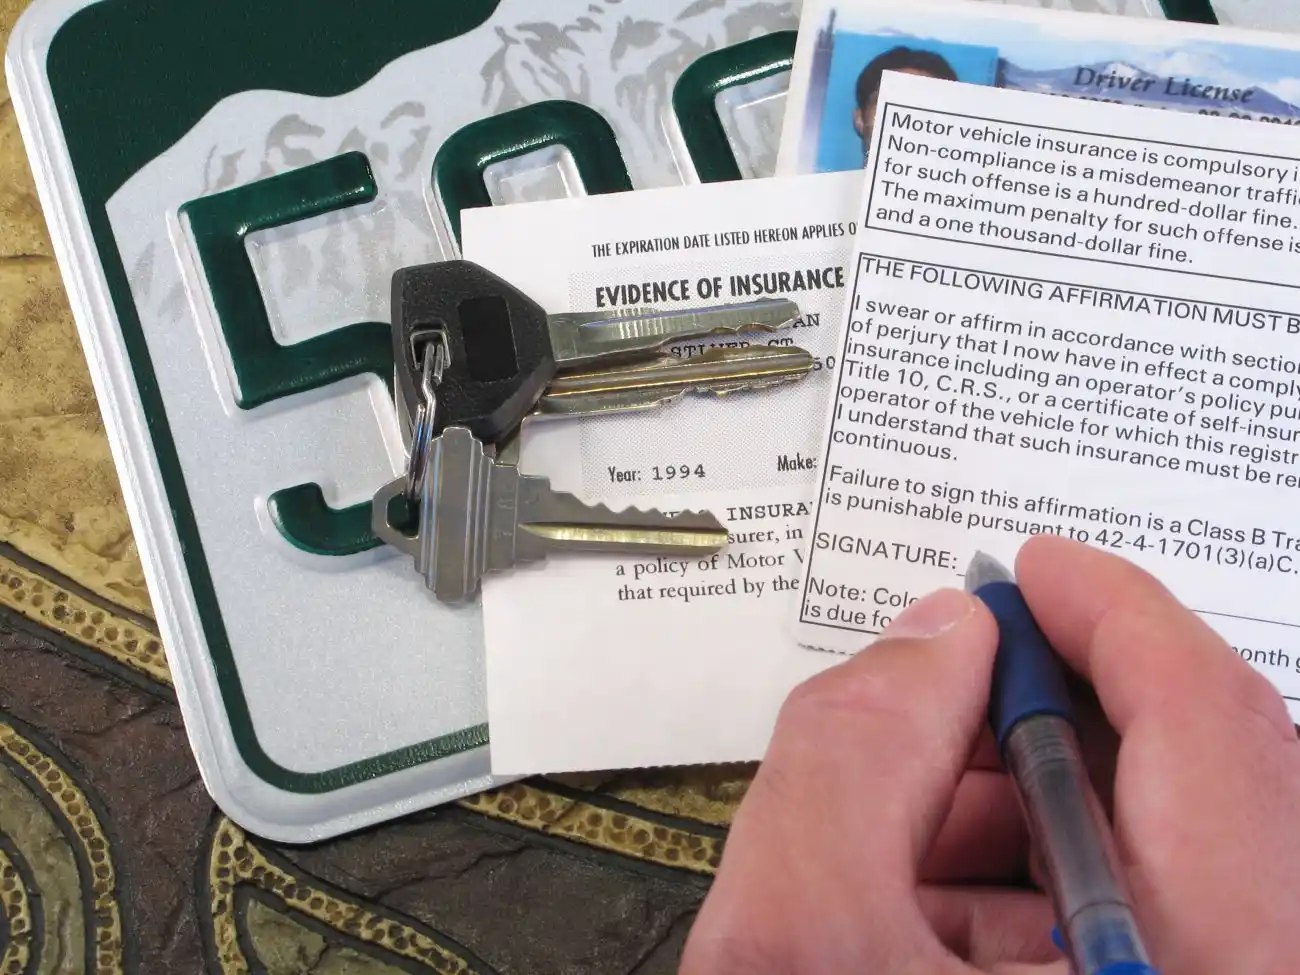 Signing Car Insurance Application with Keys and License